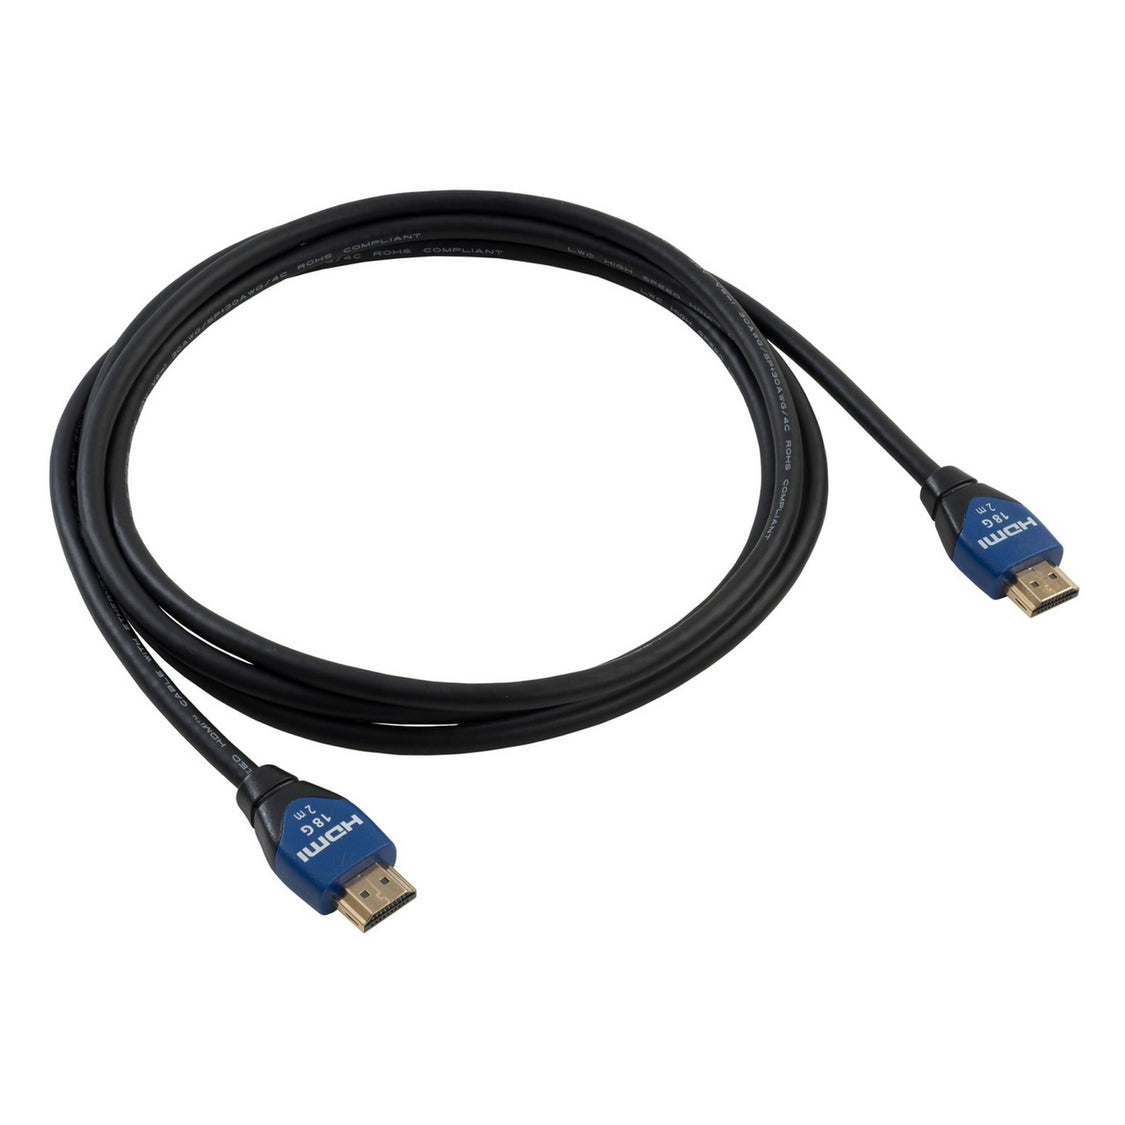 Liberty AV HALO-HC30M 30-Meter HALO Series High Speed HDMI Cable with Ethernet